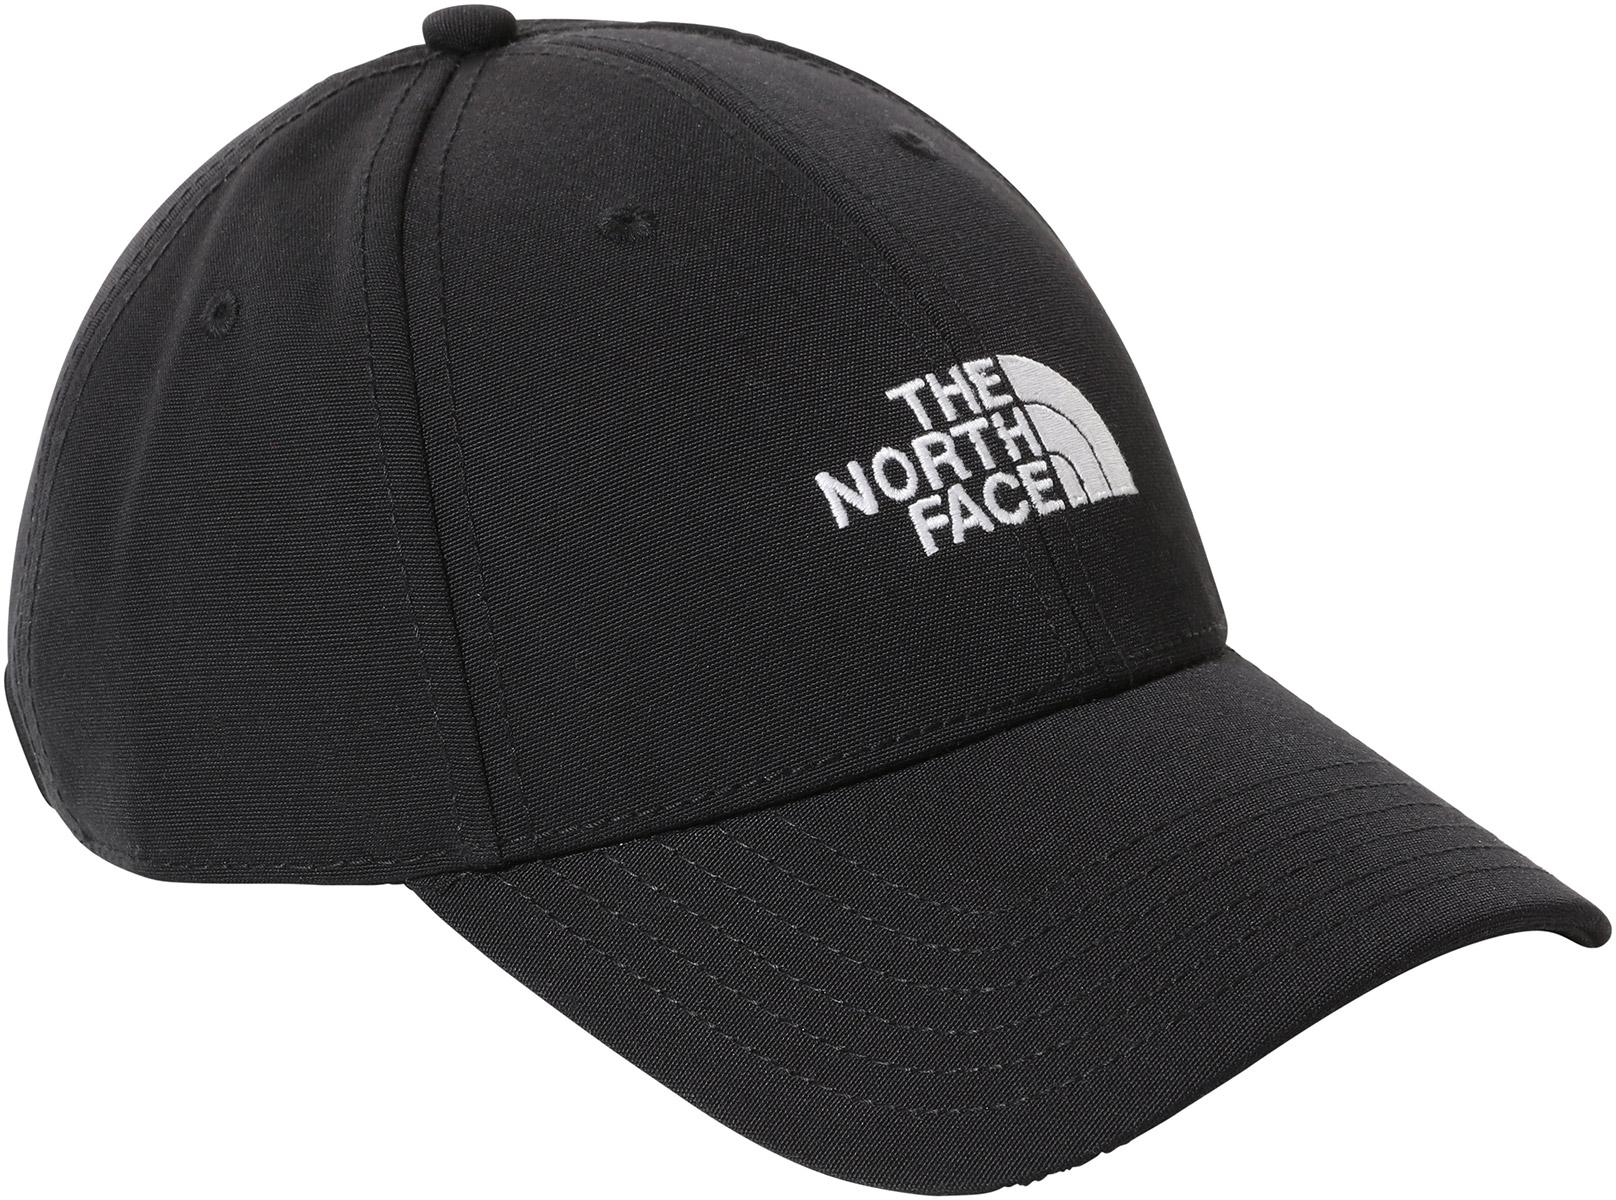 The North Face Recycled 66 Classic Hat - Tnf Black/tnf White